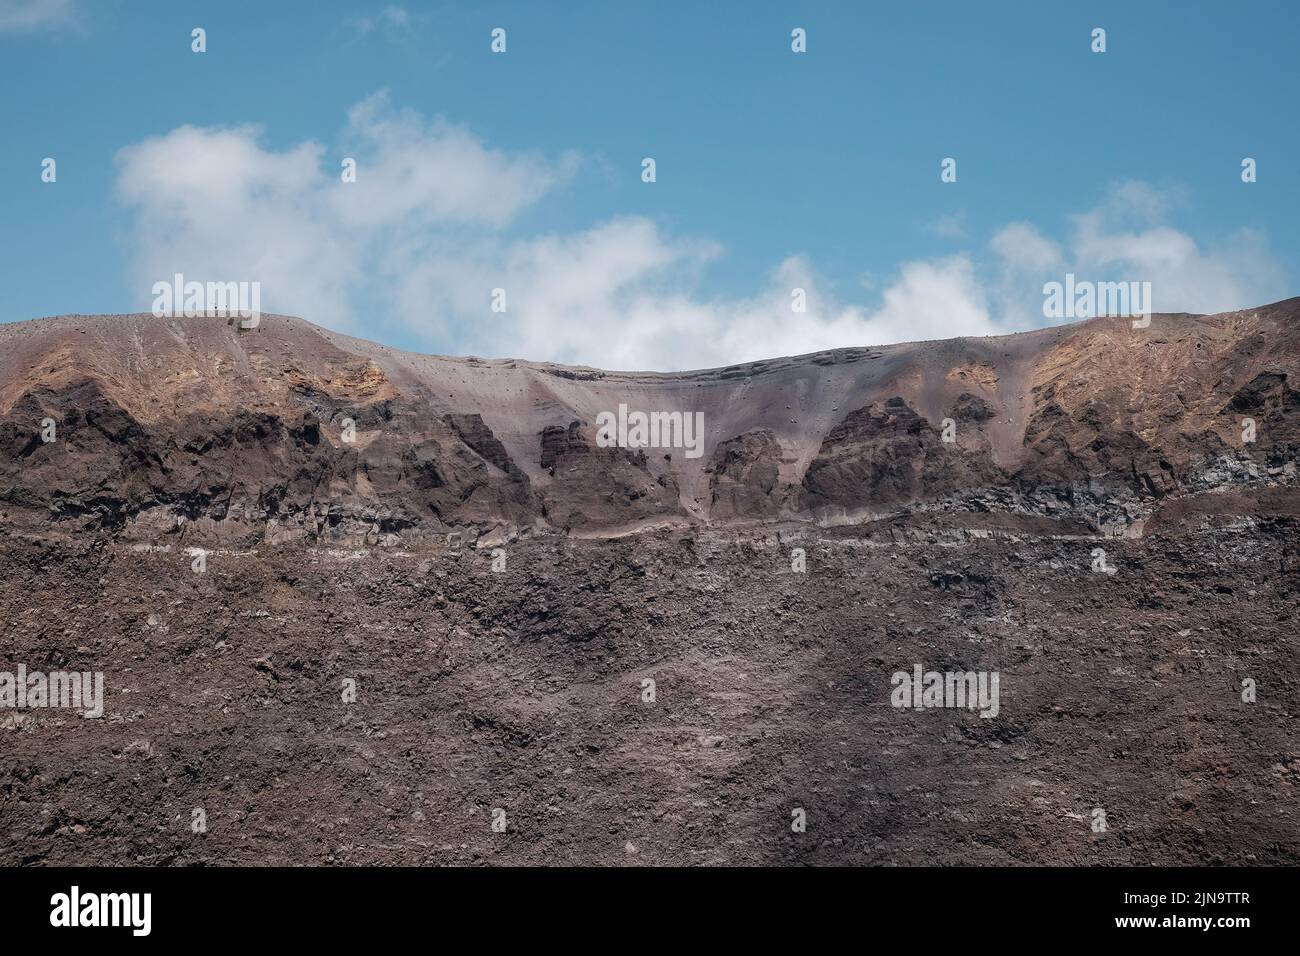 Close-ups around the cone at the top of Mount Vesuvius Italy showing the different layers of rock looking towards the closed vent. Stock Photo